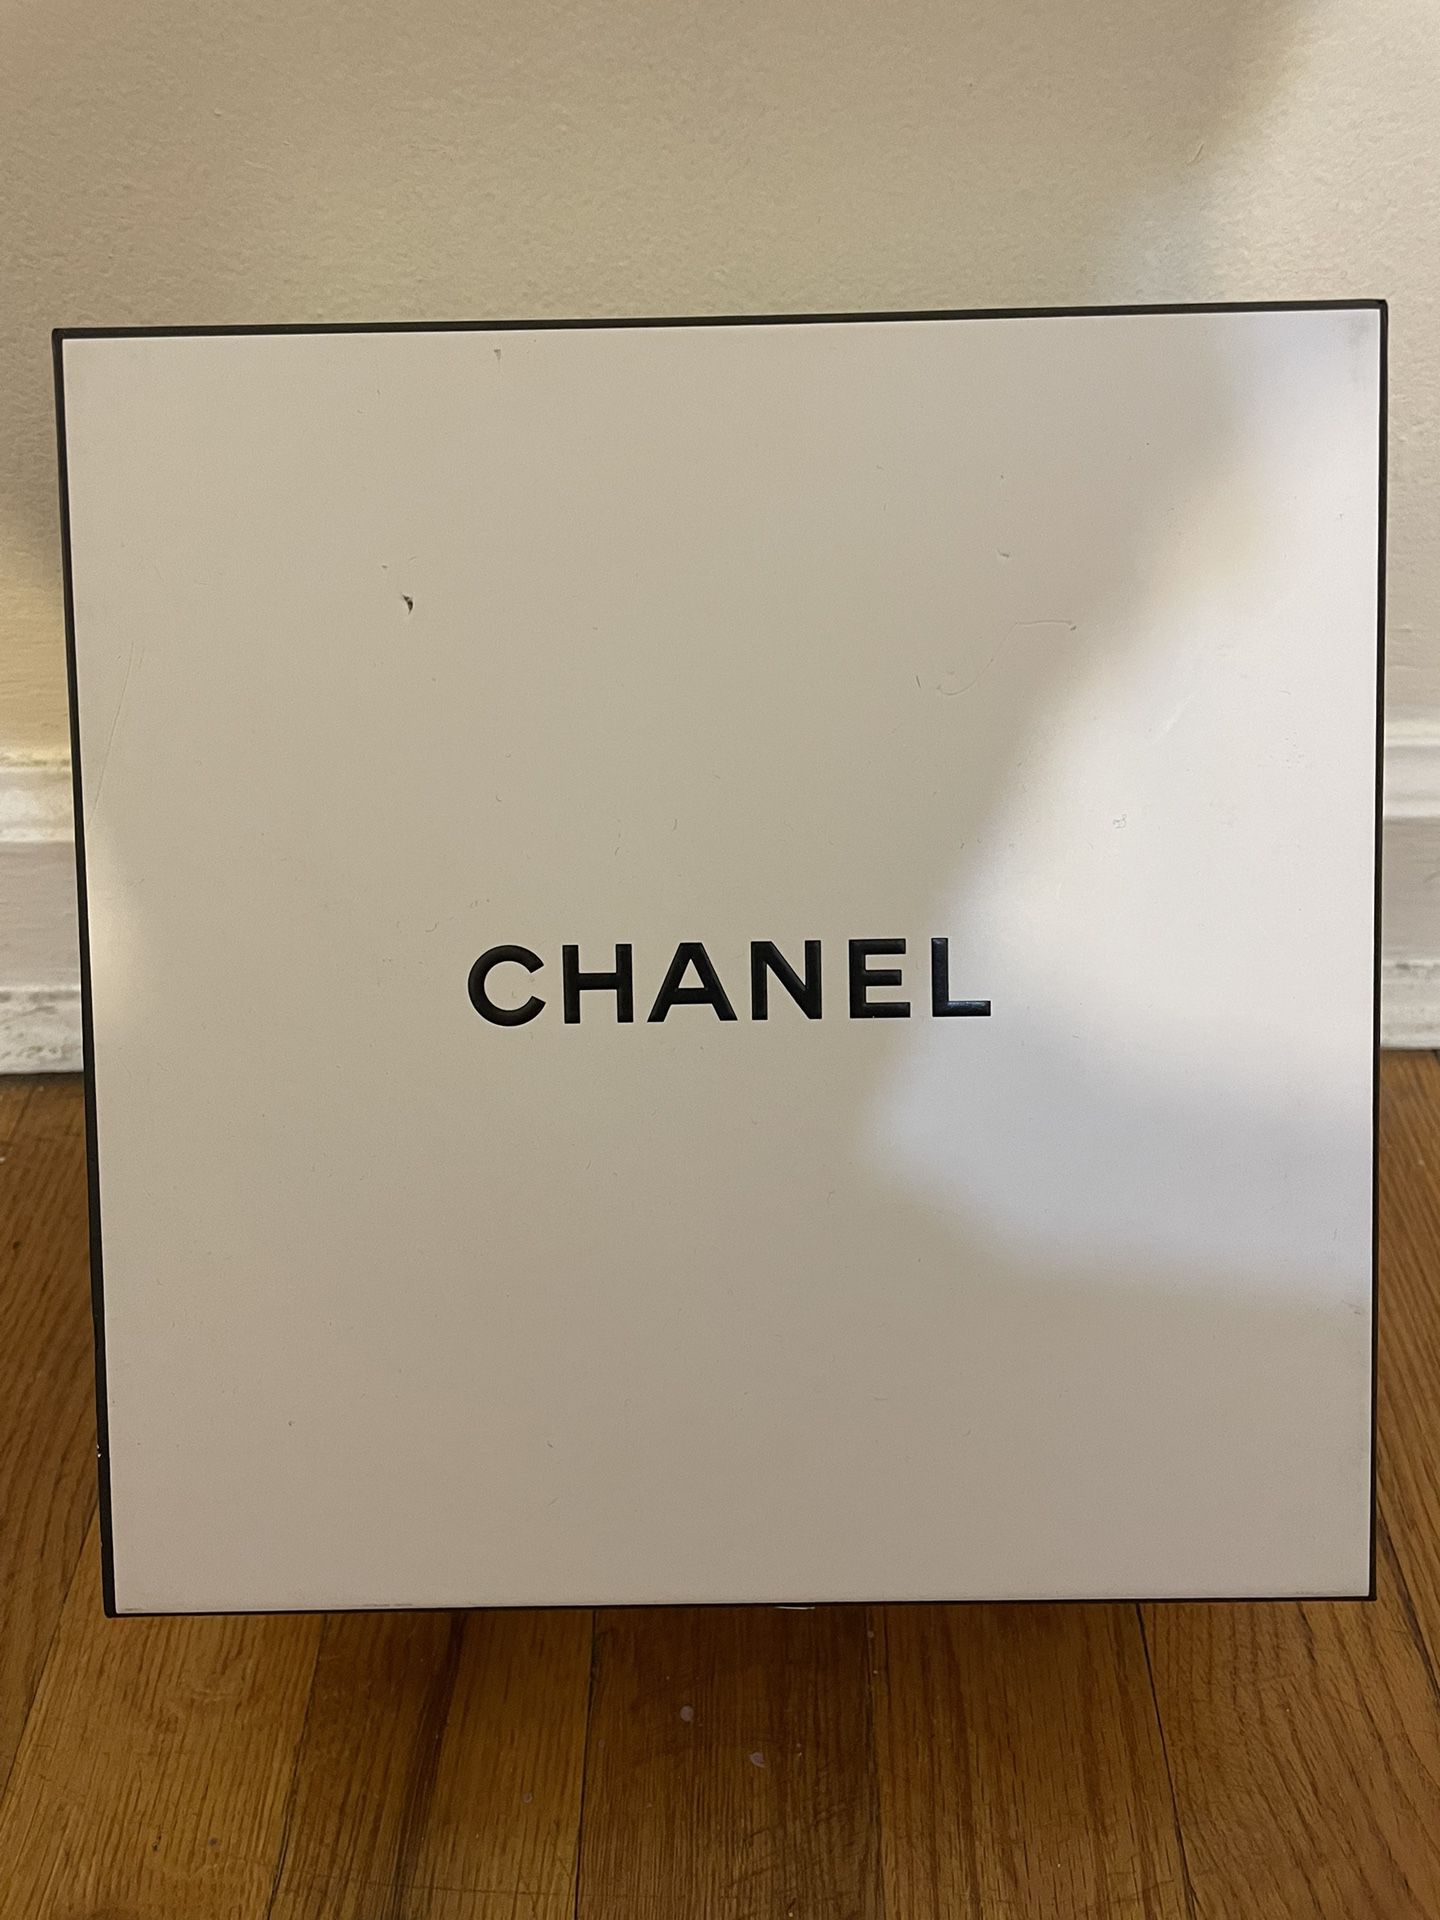 Chanel Chance Eau Tendre Perfume for Sale in New York, NY - OfferUp